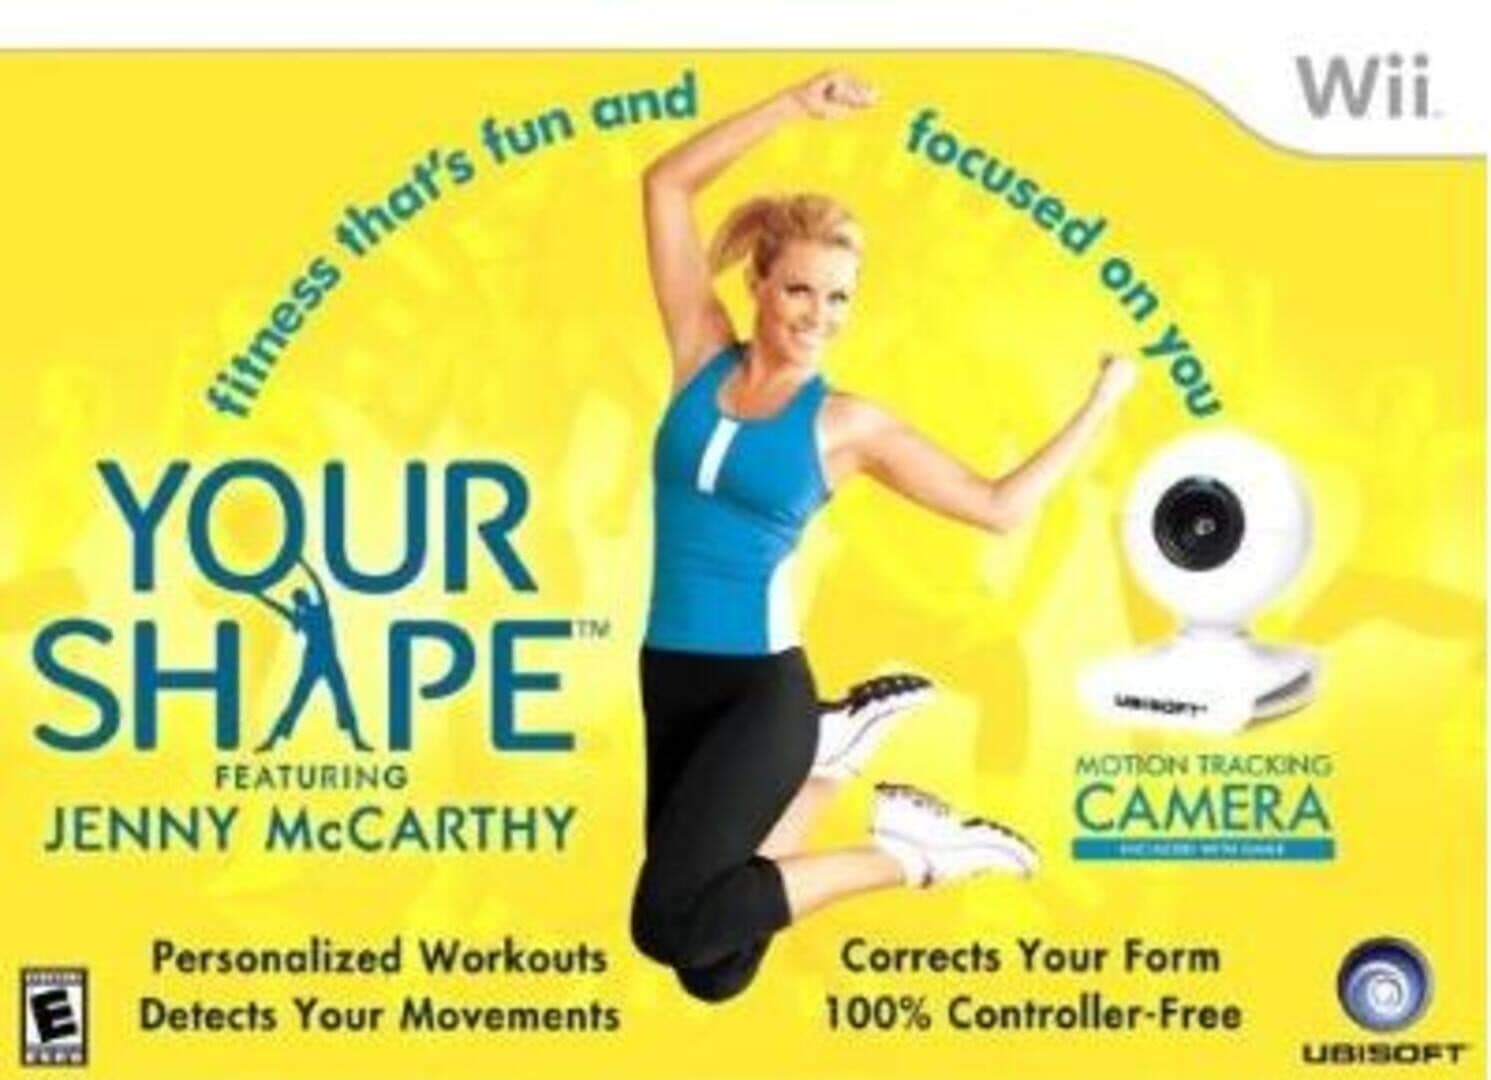 Your Shape Featuring Jenny McCarthy cover art